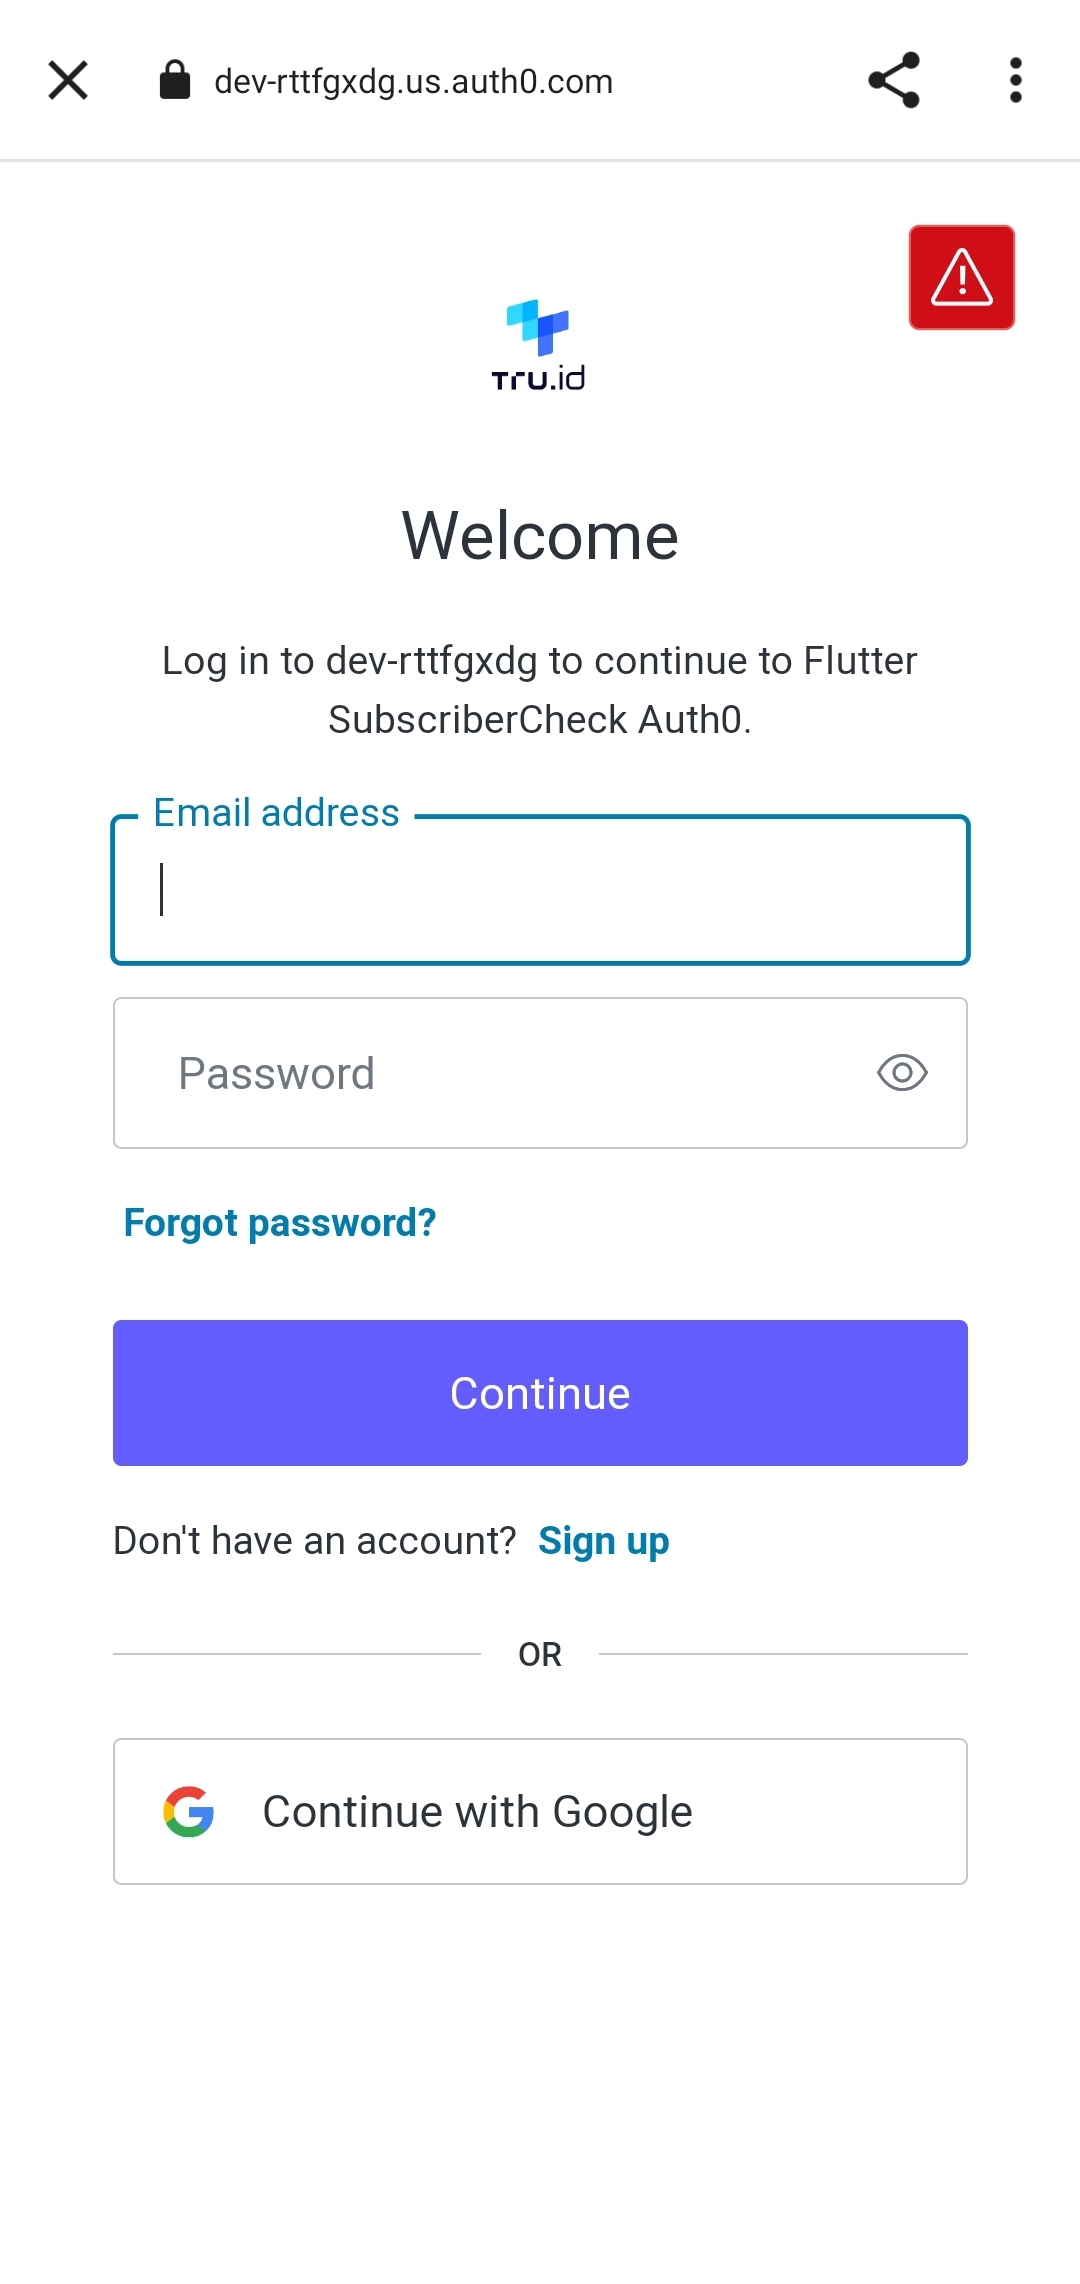 A screenshot of a mobile device having been navigated to the Auth0 universal login page. This page contains the tru.ID logo and a Welcome label, followed by text reading 'Log in to <app name> to continue to Flutter SubscriberCheck Auth0.' Below this are two input fields, an email address, and password field, followed by a Continue button.